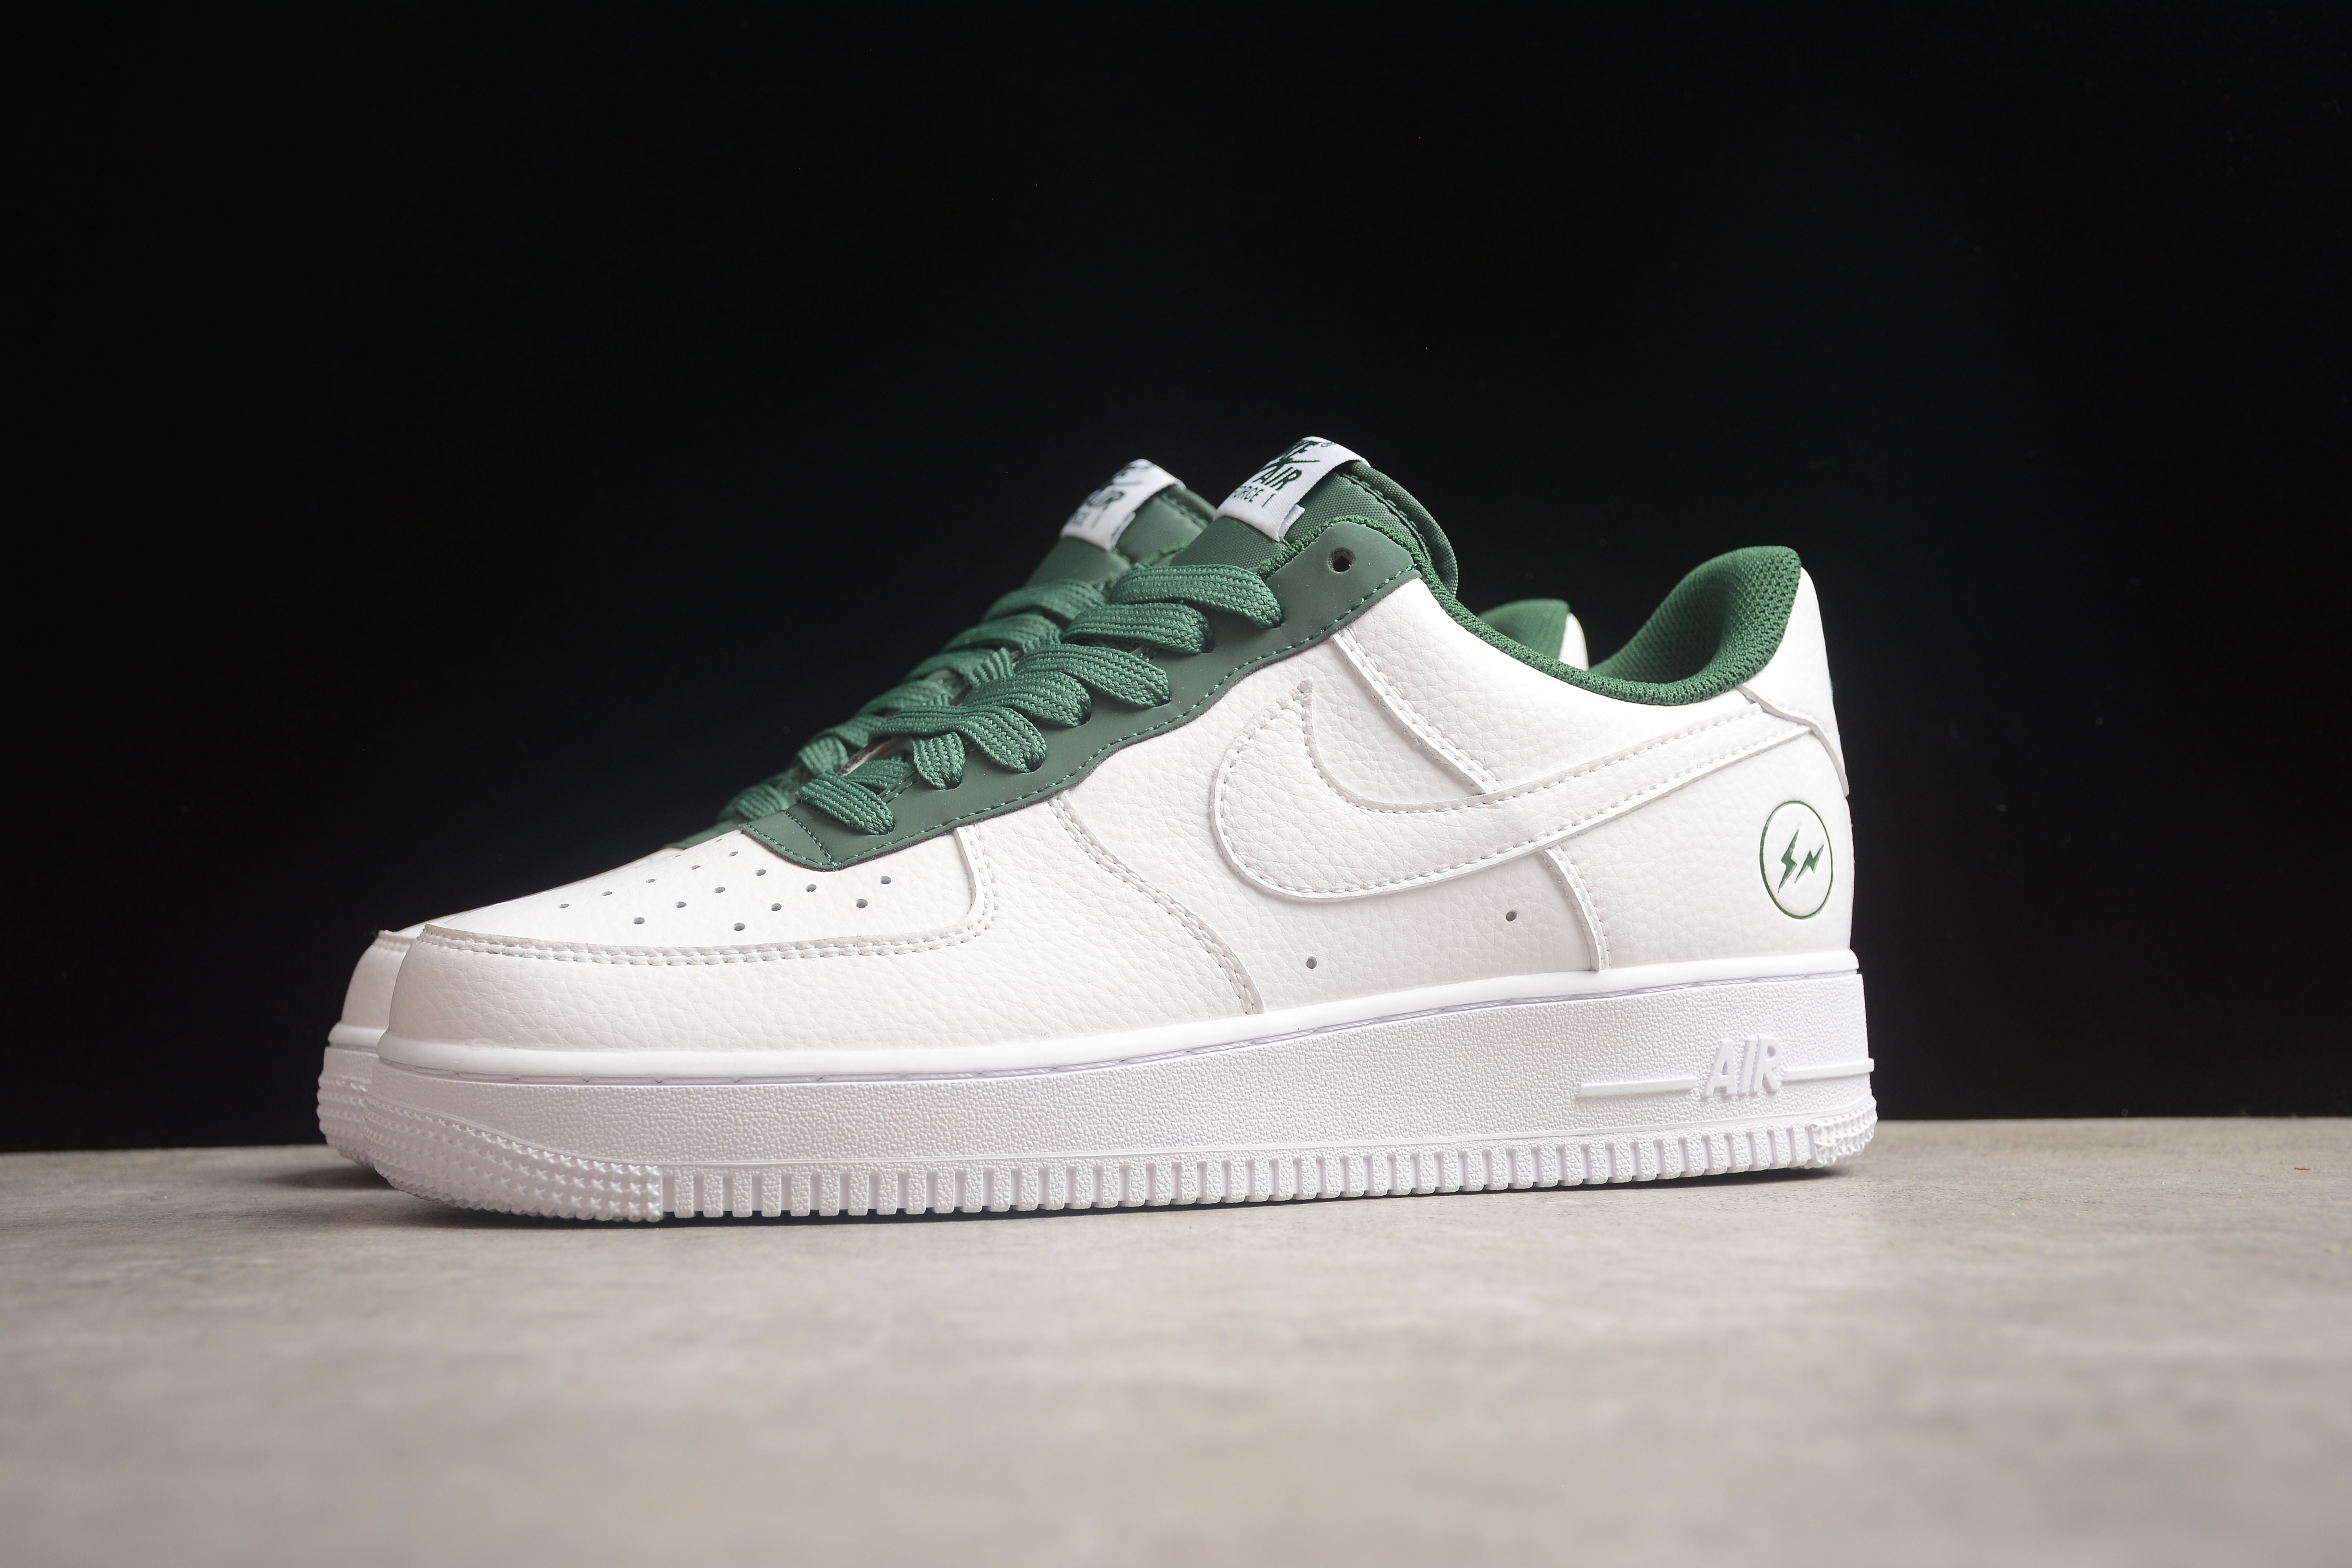 Nike airforce A1 white and olive green shoes